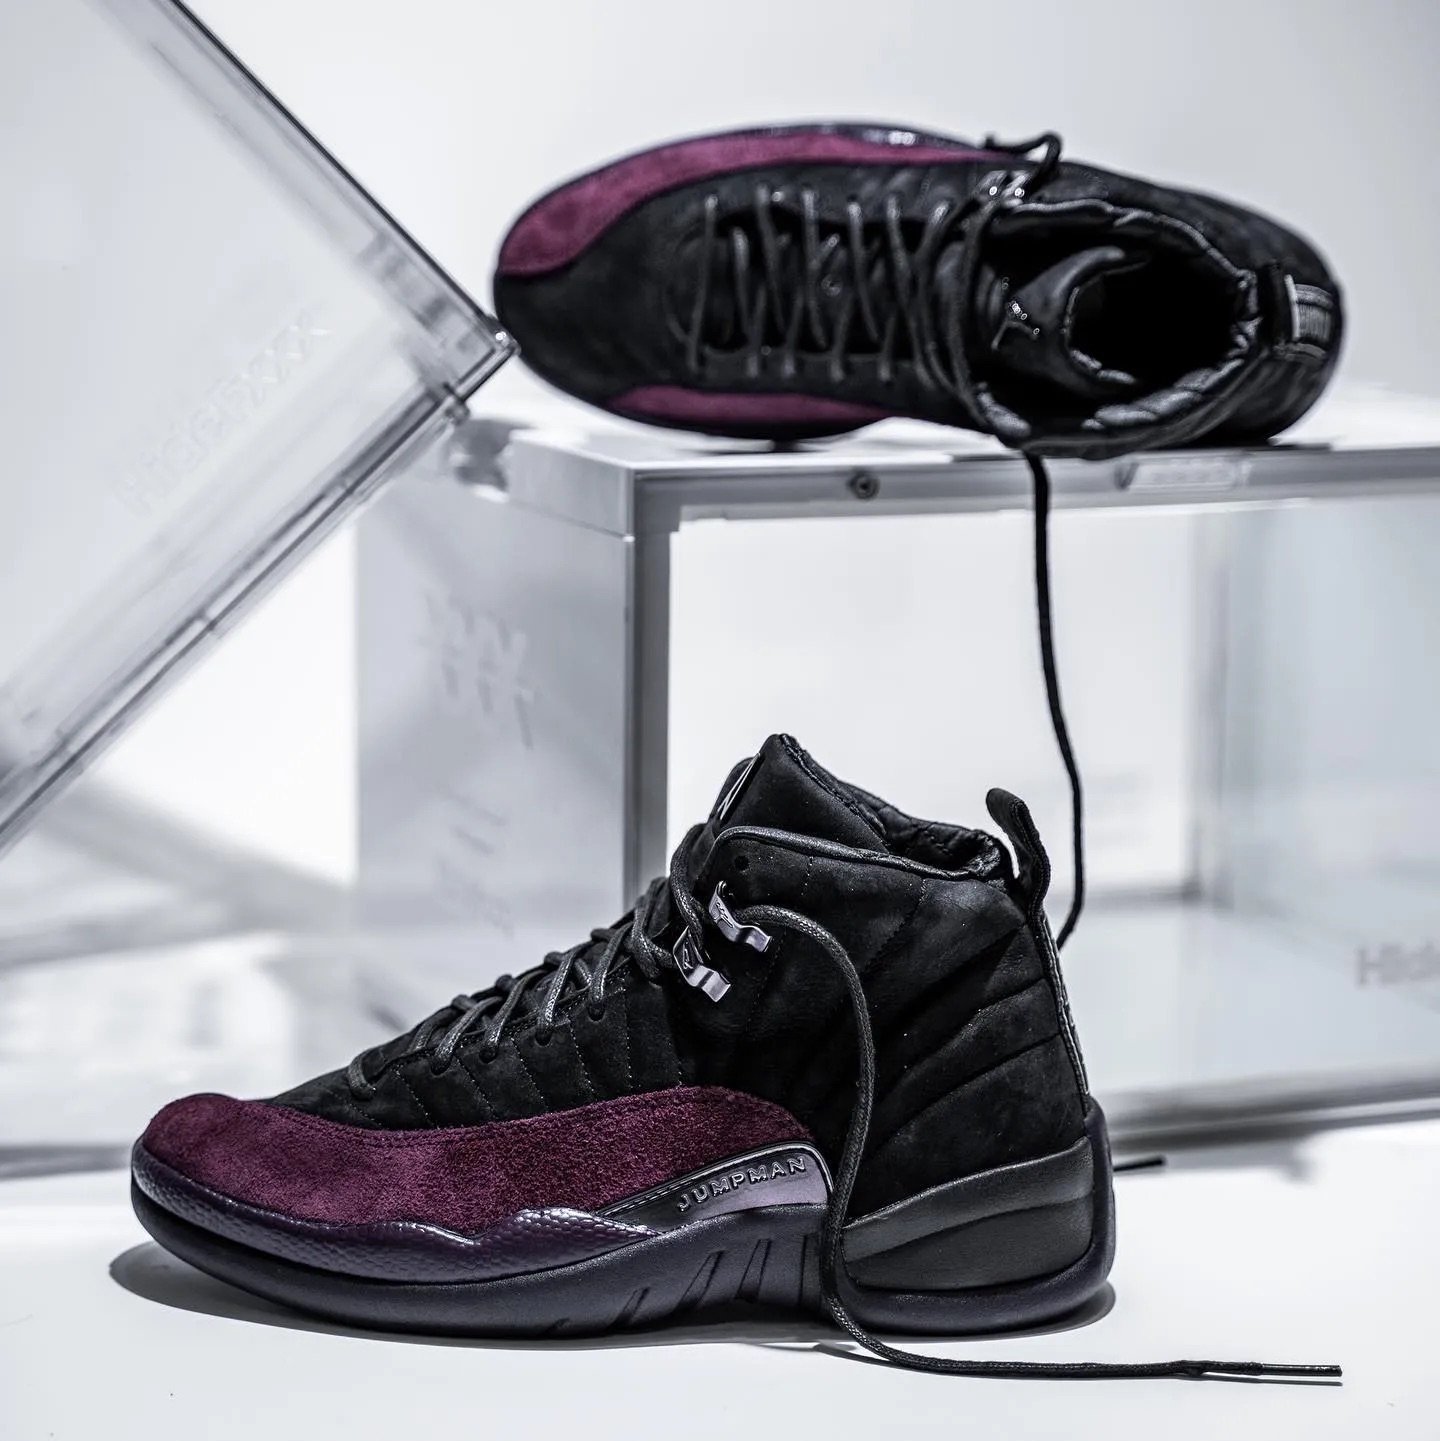 A Ma Maniére Has Two Air Jordan 12 Colorways Releasing In February -  Sneaker News